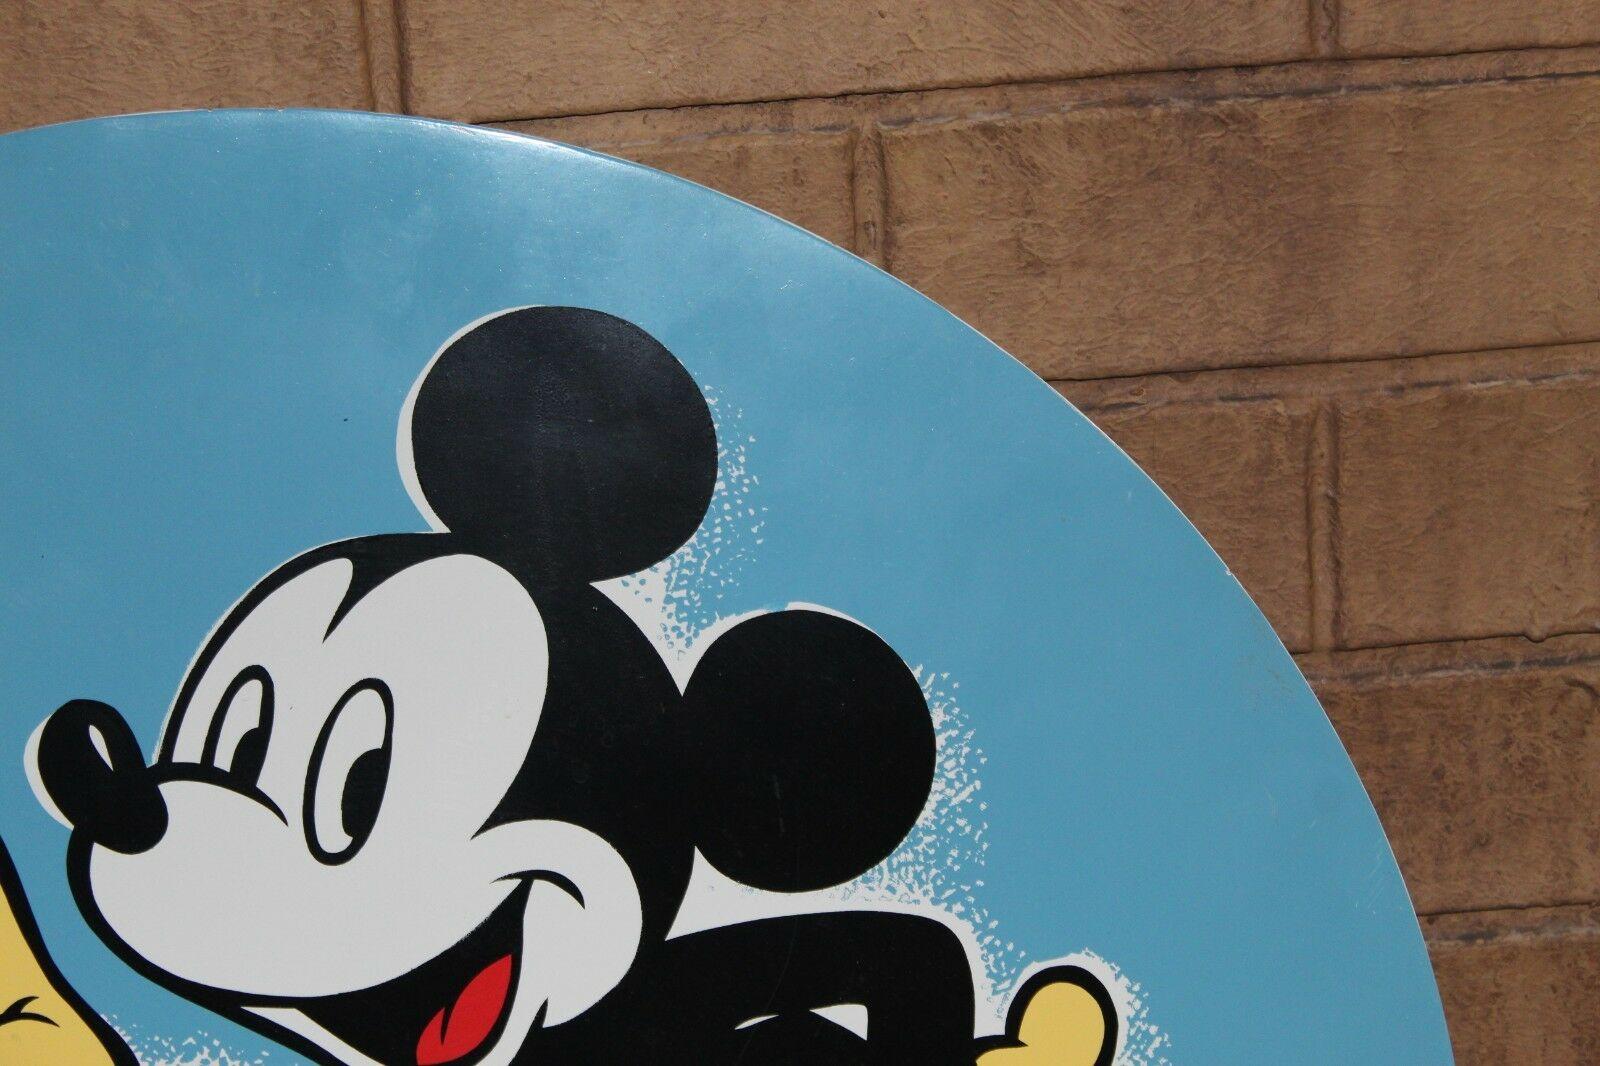 1939 RPM Motor Oil Tin Sign with Disney's Mickey Mouse In Good Condition For Sale In Orange, CA